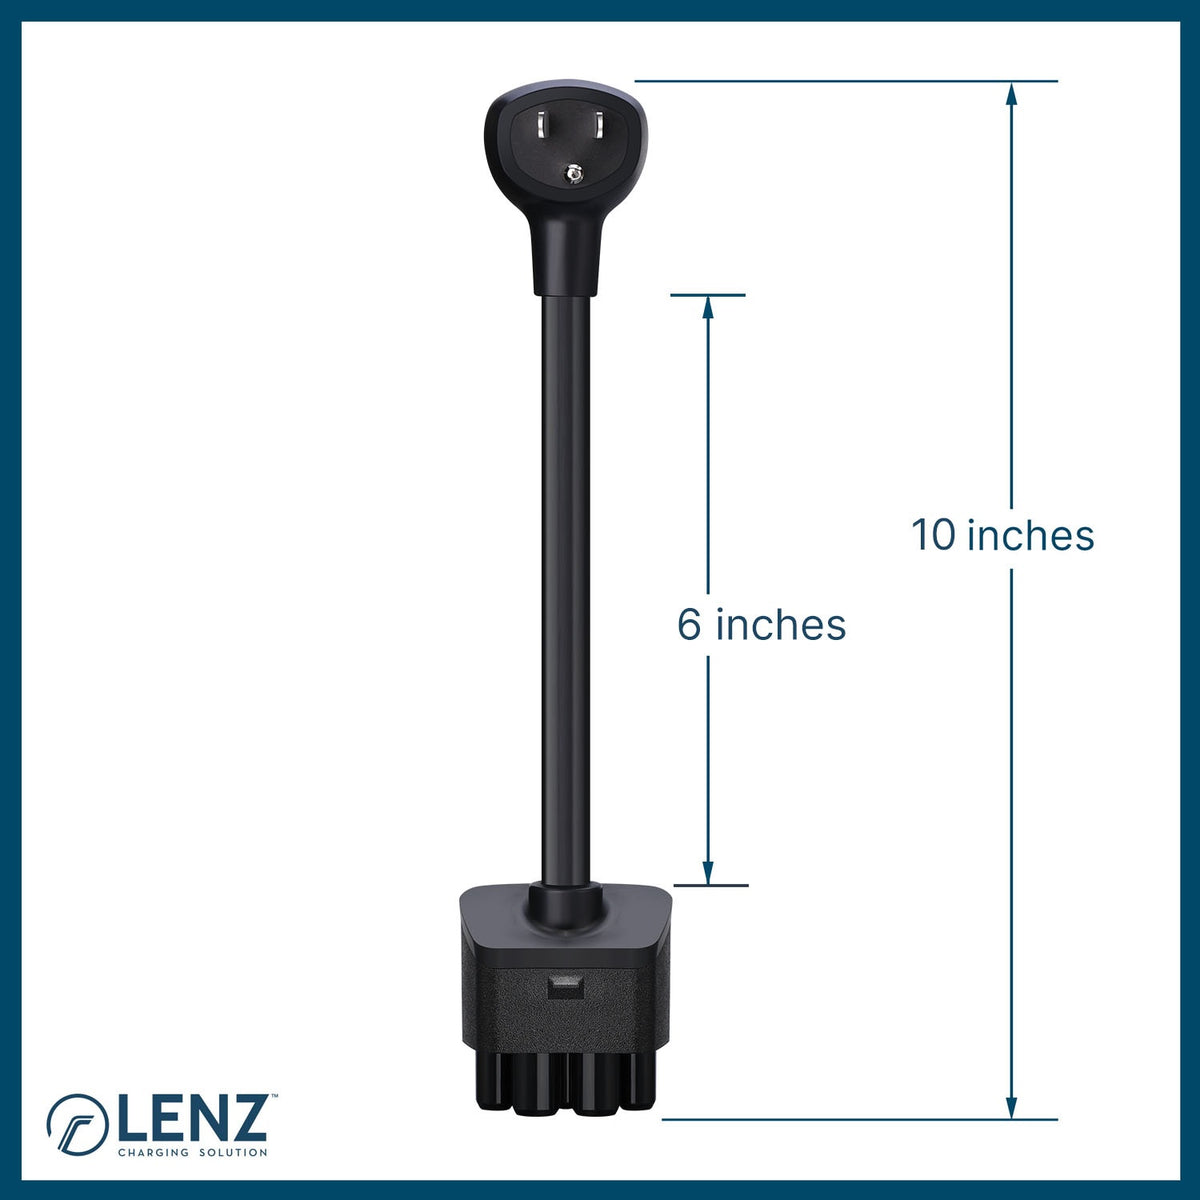 LENZ NEMA 5-15 Adapter for Tesla Gen 2 Mobile Connector measures 10 inches end-to-end. A longer extended 14 inch version is available.